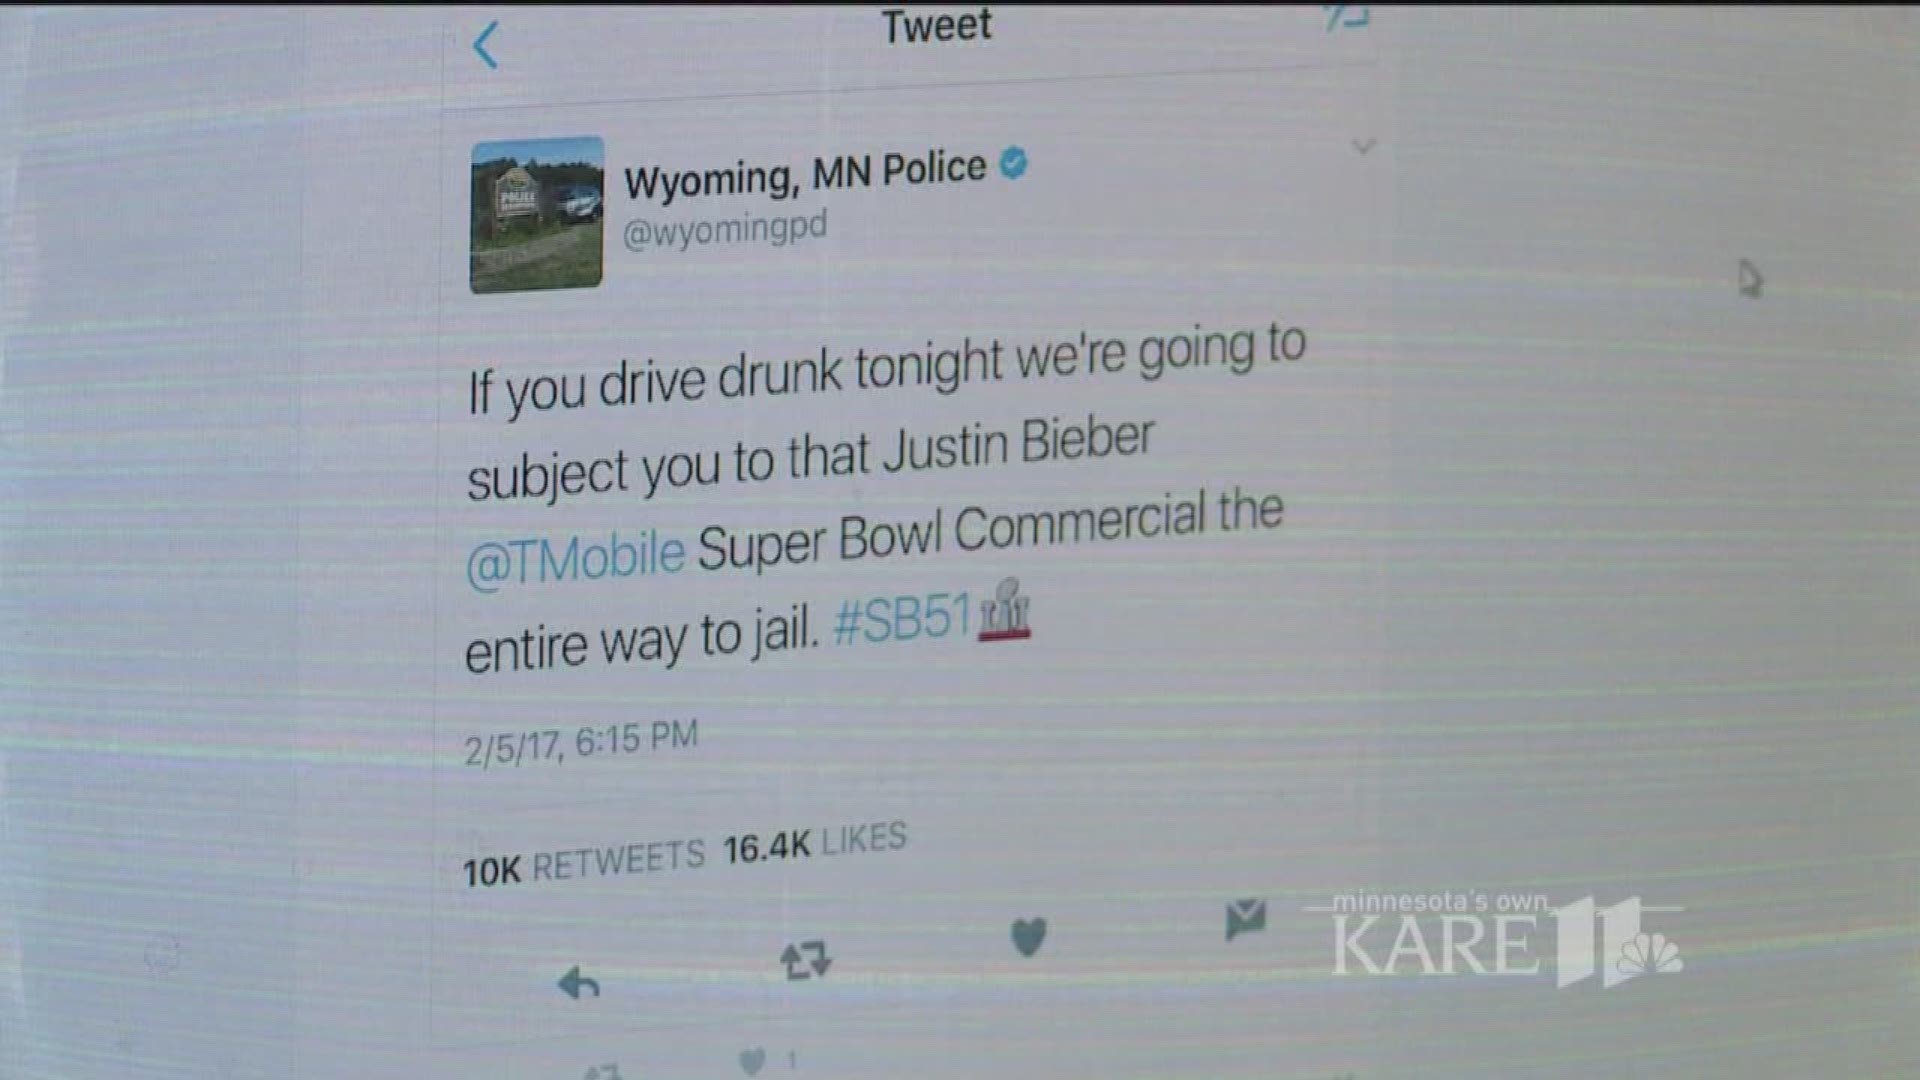 A MN police department uses humorous posts on Twitter to spread serious messages, including warnings about distracted driving.